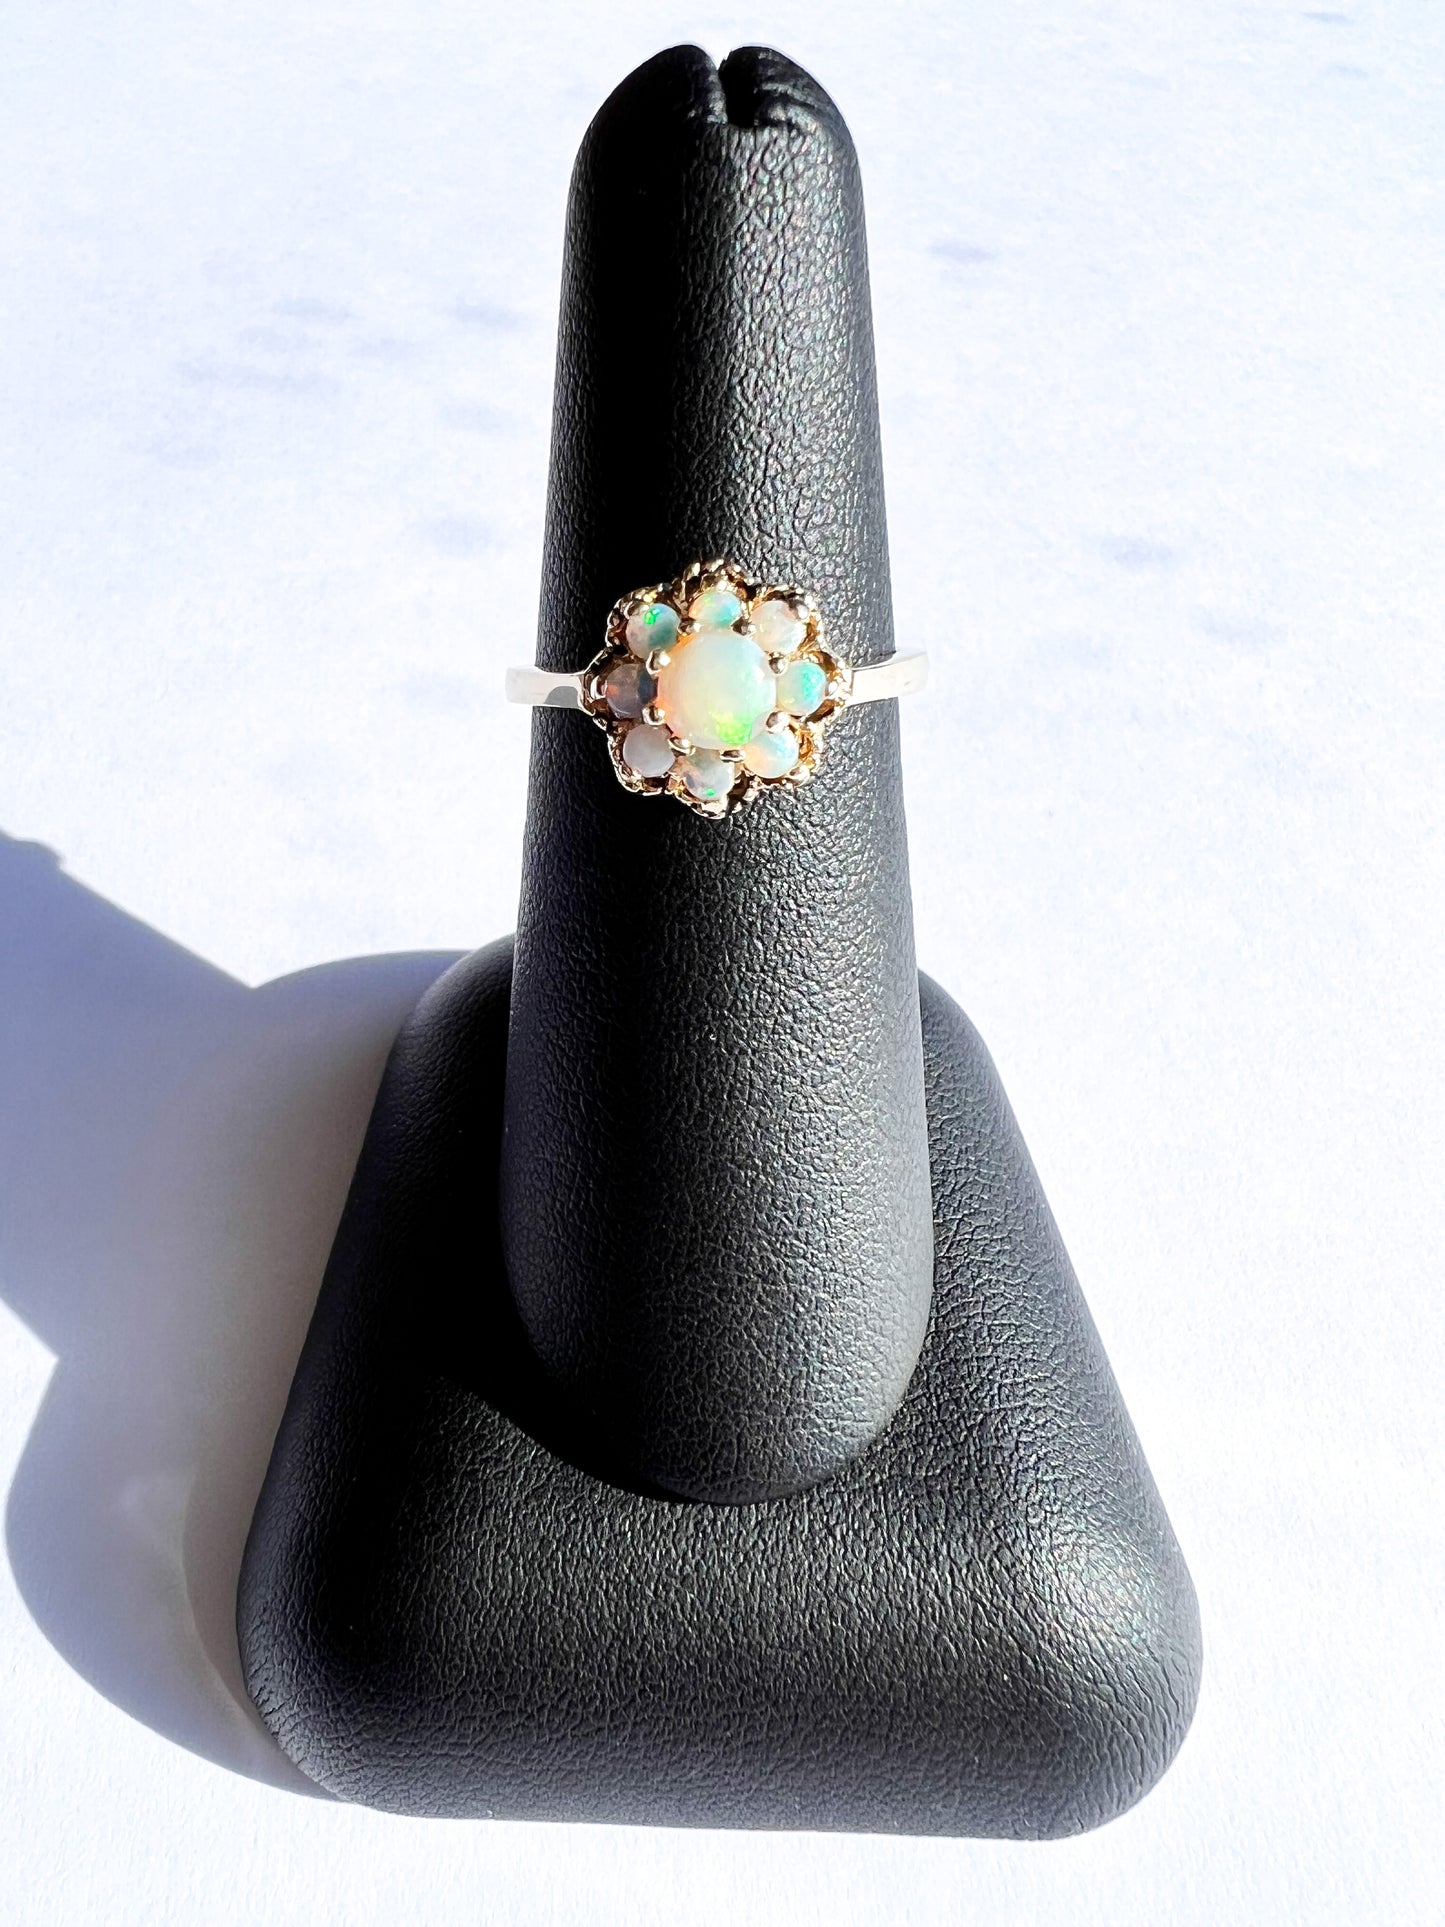 Vintage 10K Yellow Gold Opal Ring